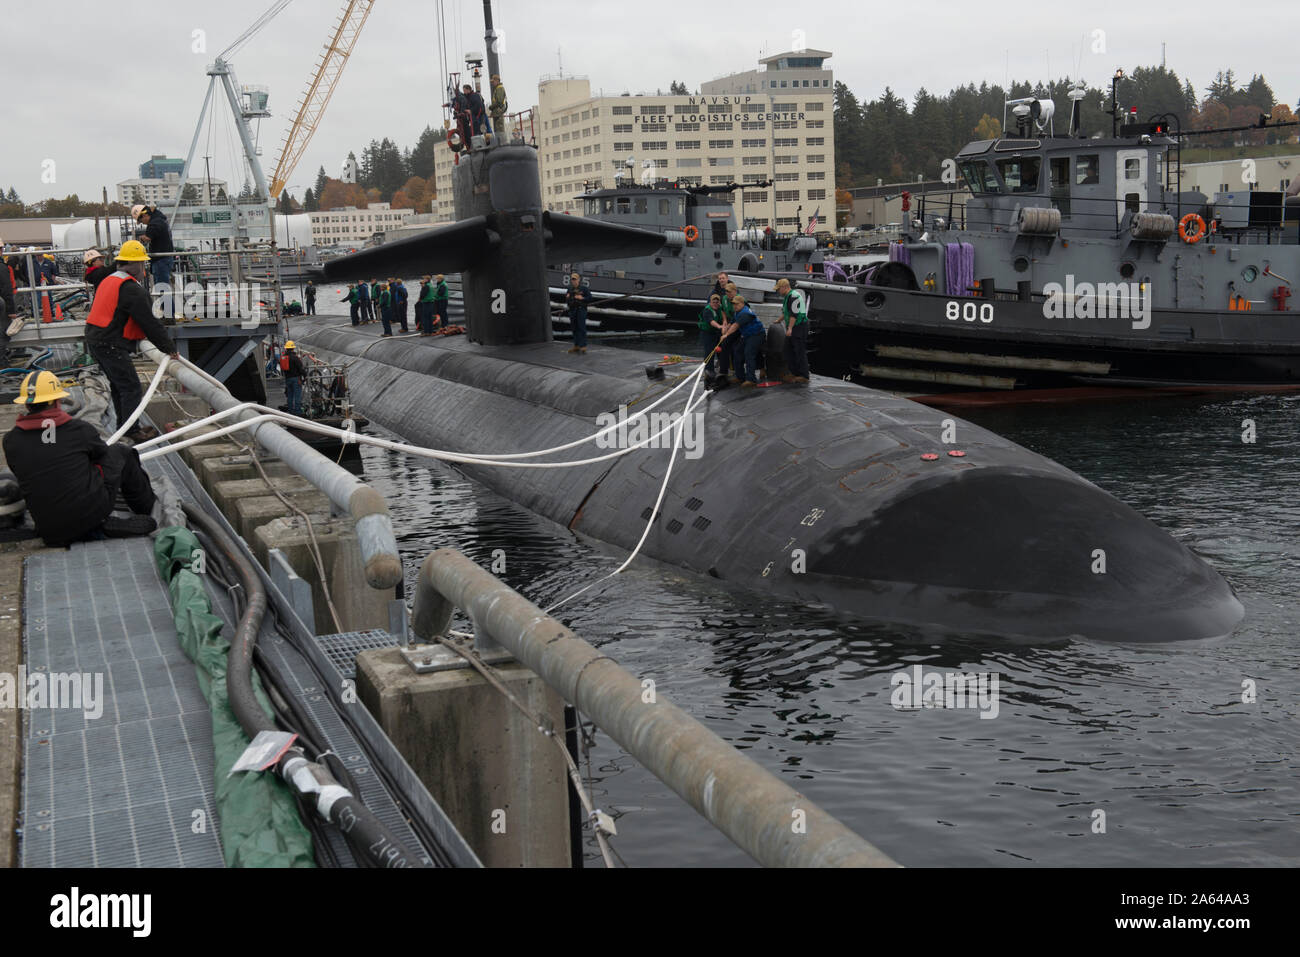 BREMERTON, Wash. (Oct. 22, 2019) – The Los Angeles-class fast-attack submarine USS Louisville (SSN 724), arrives at Naval Base Kitsap-Bremerton to commence the inactivation and decommissioning process. Louisville conducted its final transit from Pearl Harbor, Hawaii, to Bremerton, Washington, for its final underway and homeport change. Commissioned in 1986, Louisville made naval history by firing the first submarine-launched Tomahawk cruise missile in war during Operation Desert Shield/Desert Storm. (U.S. Navy photo by LT Mack Jamieson/Released) Stock Photo